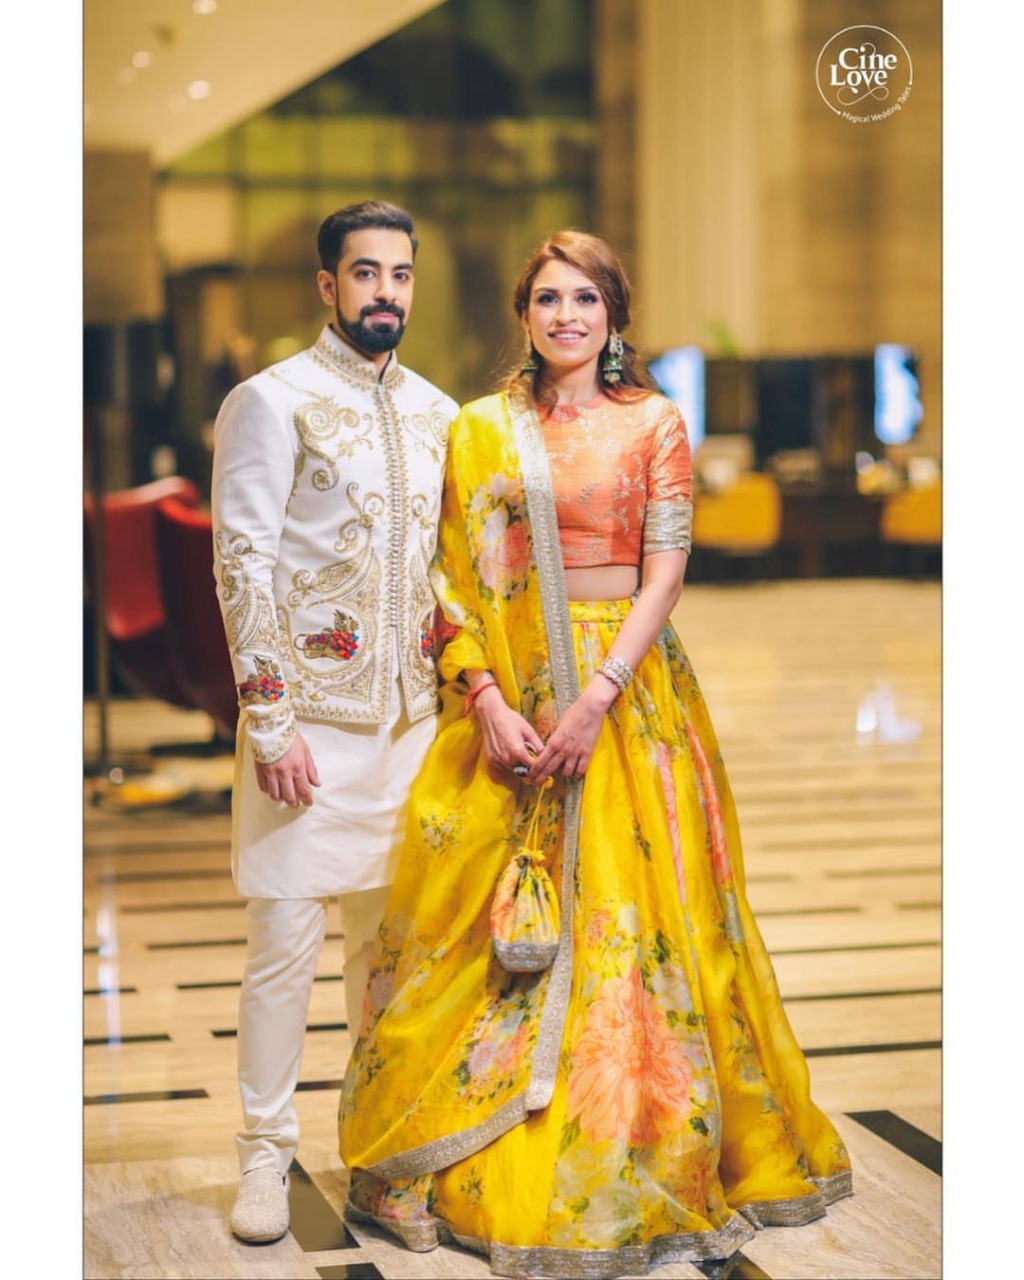 Photo of Floral print Sabyasachi lehenga in white and gold-tmf.edu.vn